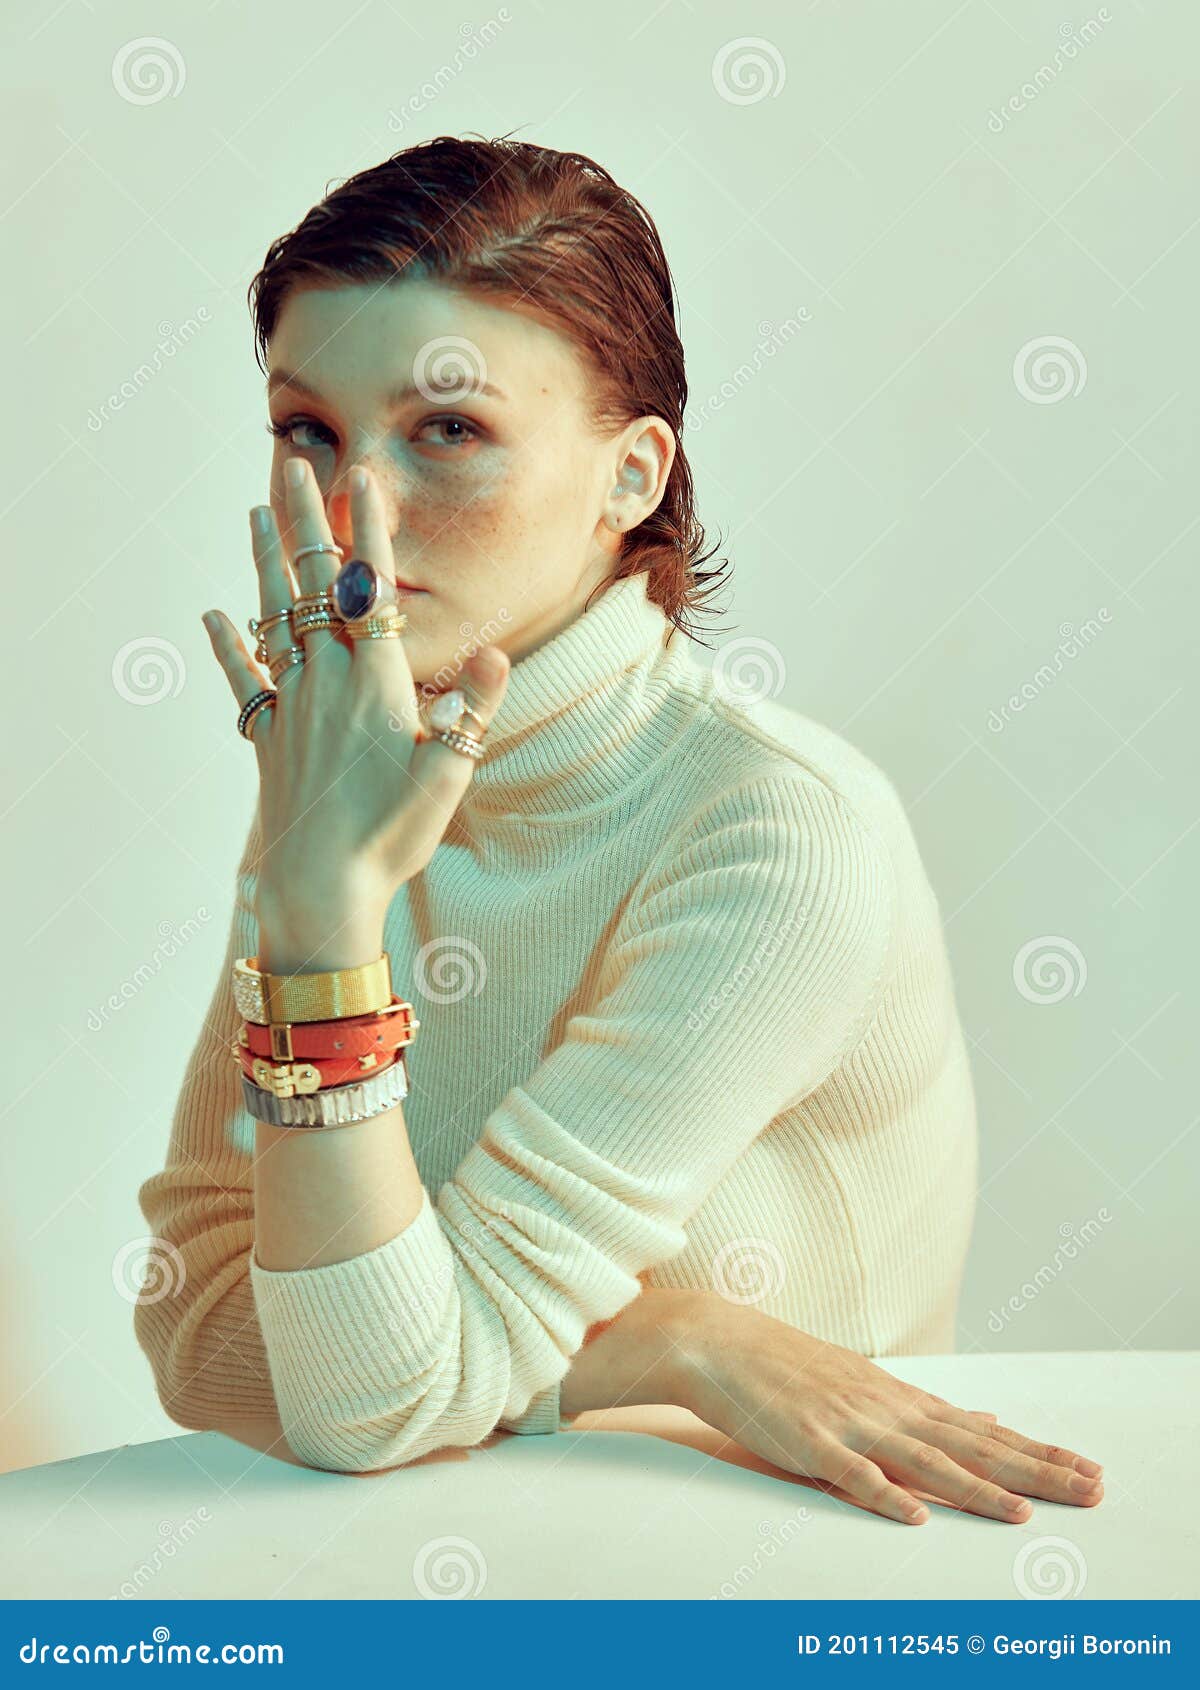 Pretty Girl With Freckles And Stylish Short Haircut Covers Her Face By Hand In Jewelleries 